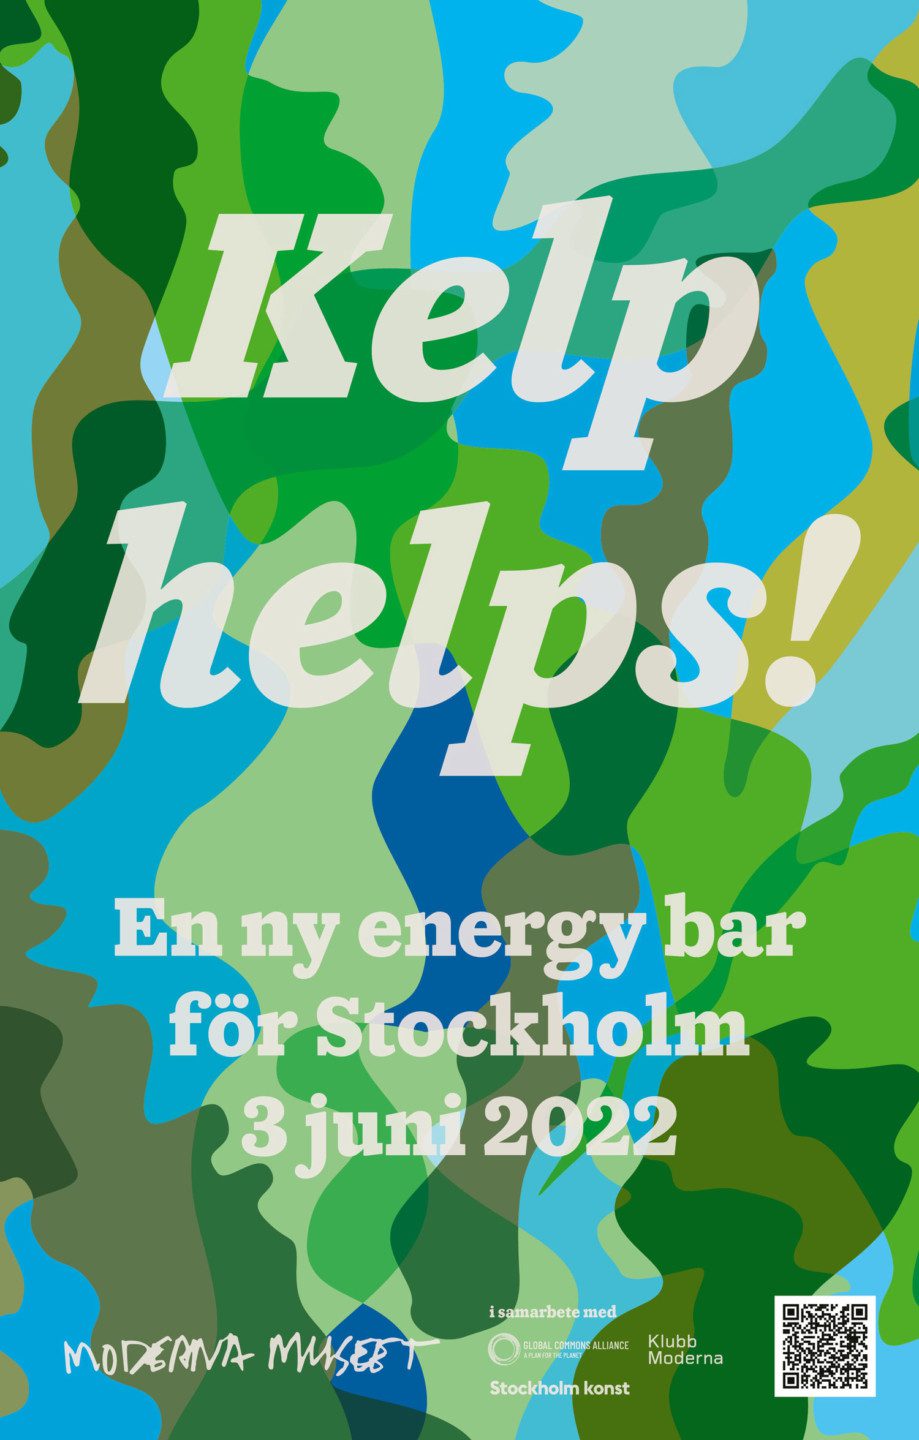 A poster for the project "God grön" where it says against a background of green and blue seaweed pattern: Kelp helps! A new energy bar for Stockholm 3 June 2022